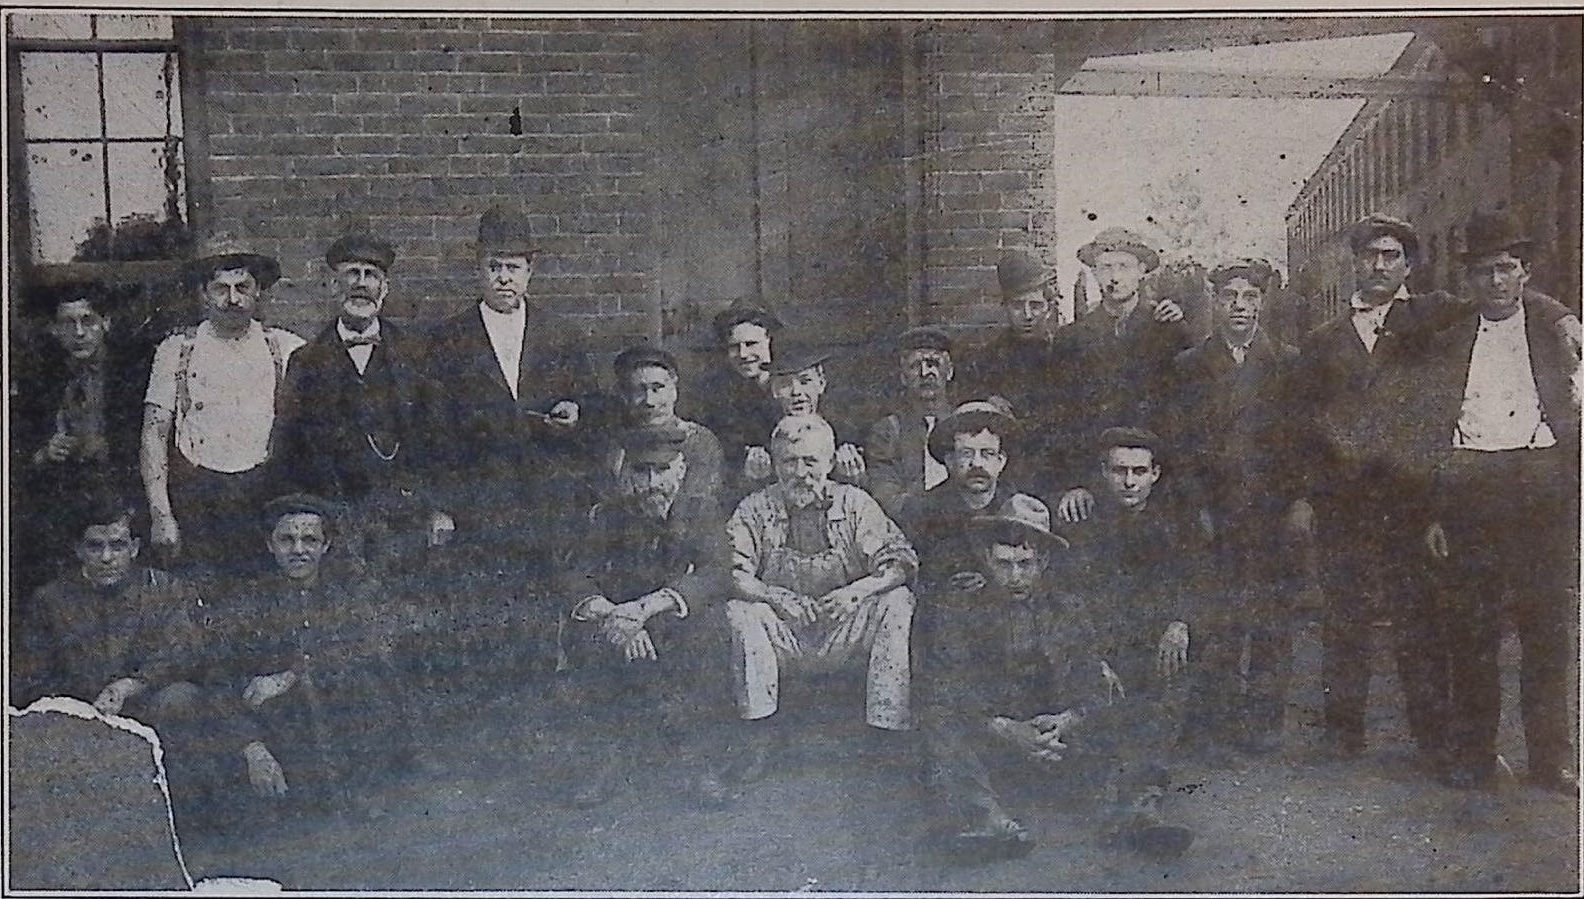 Black and white photograph of a group of men sitting or standing in front of a brick building